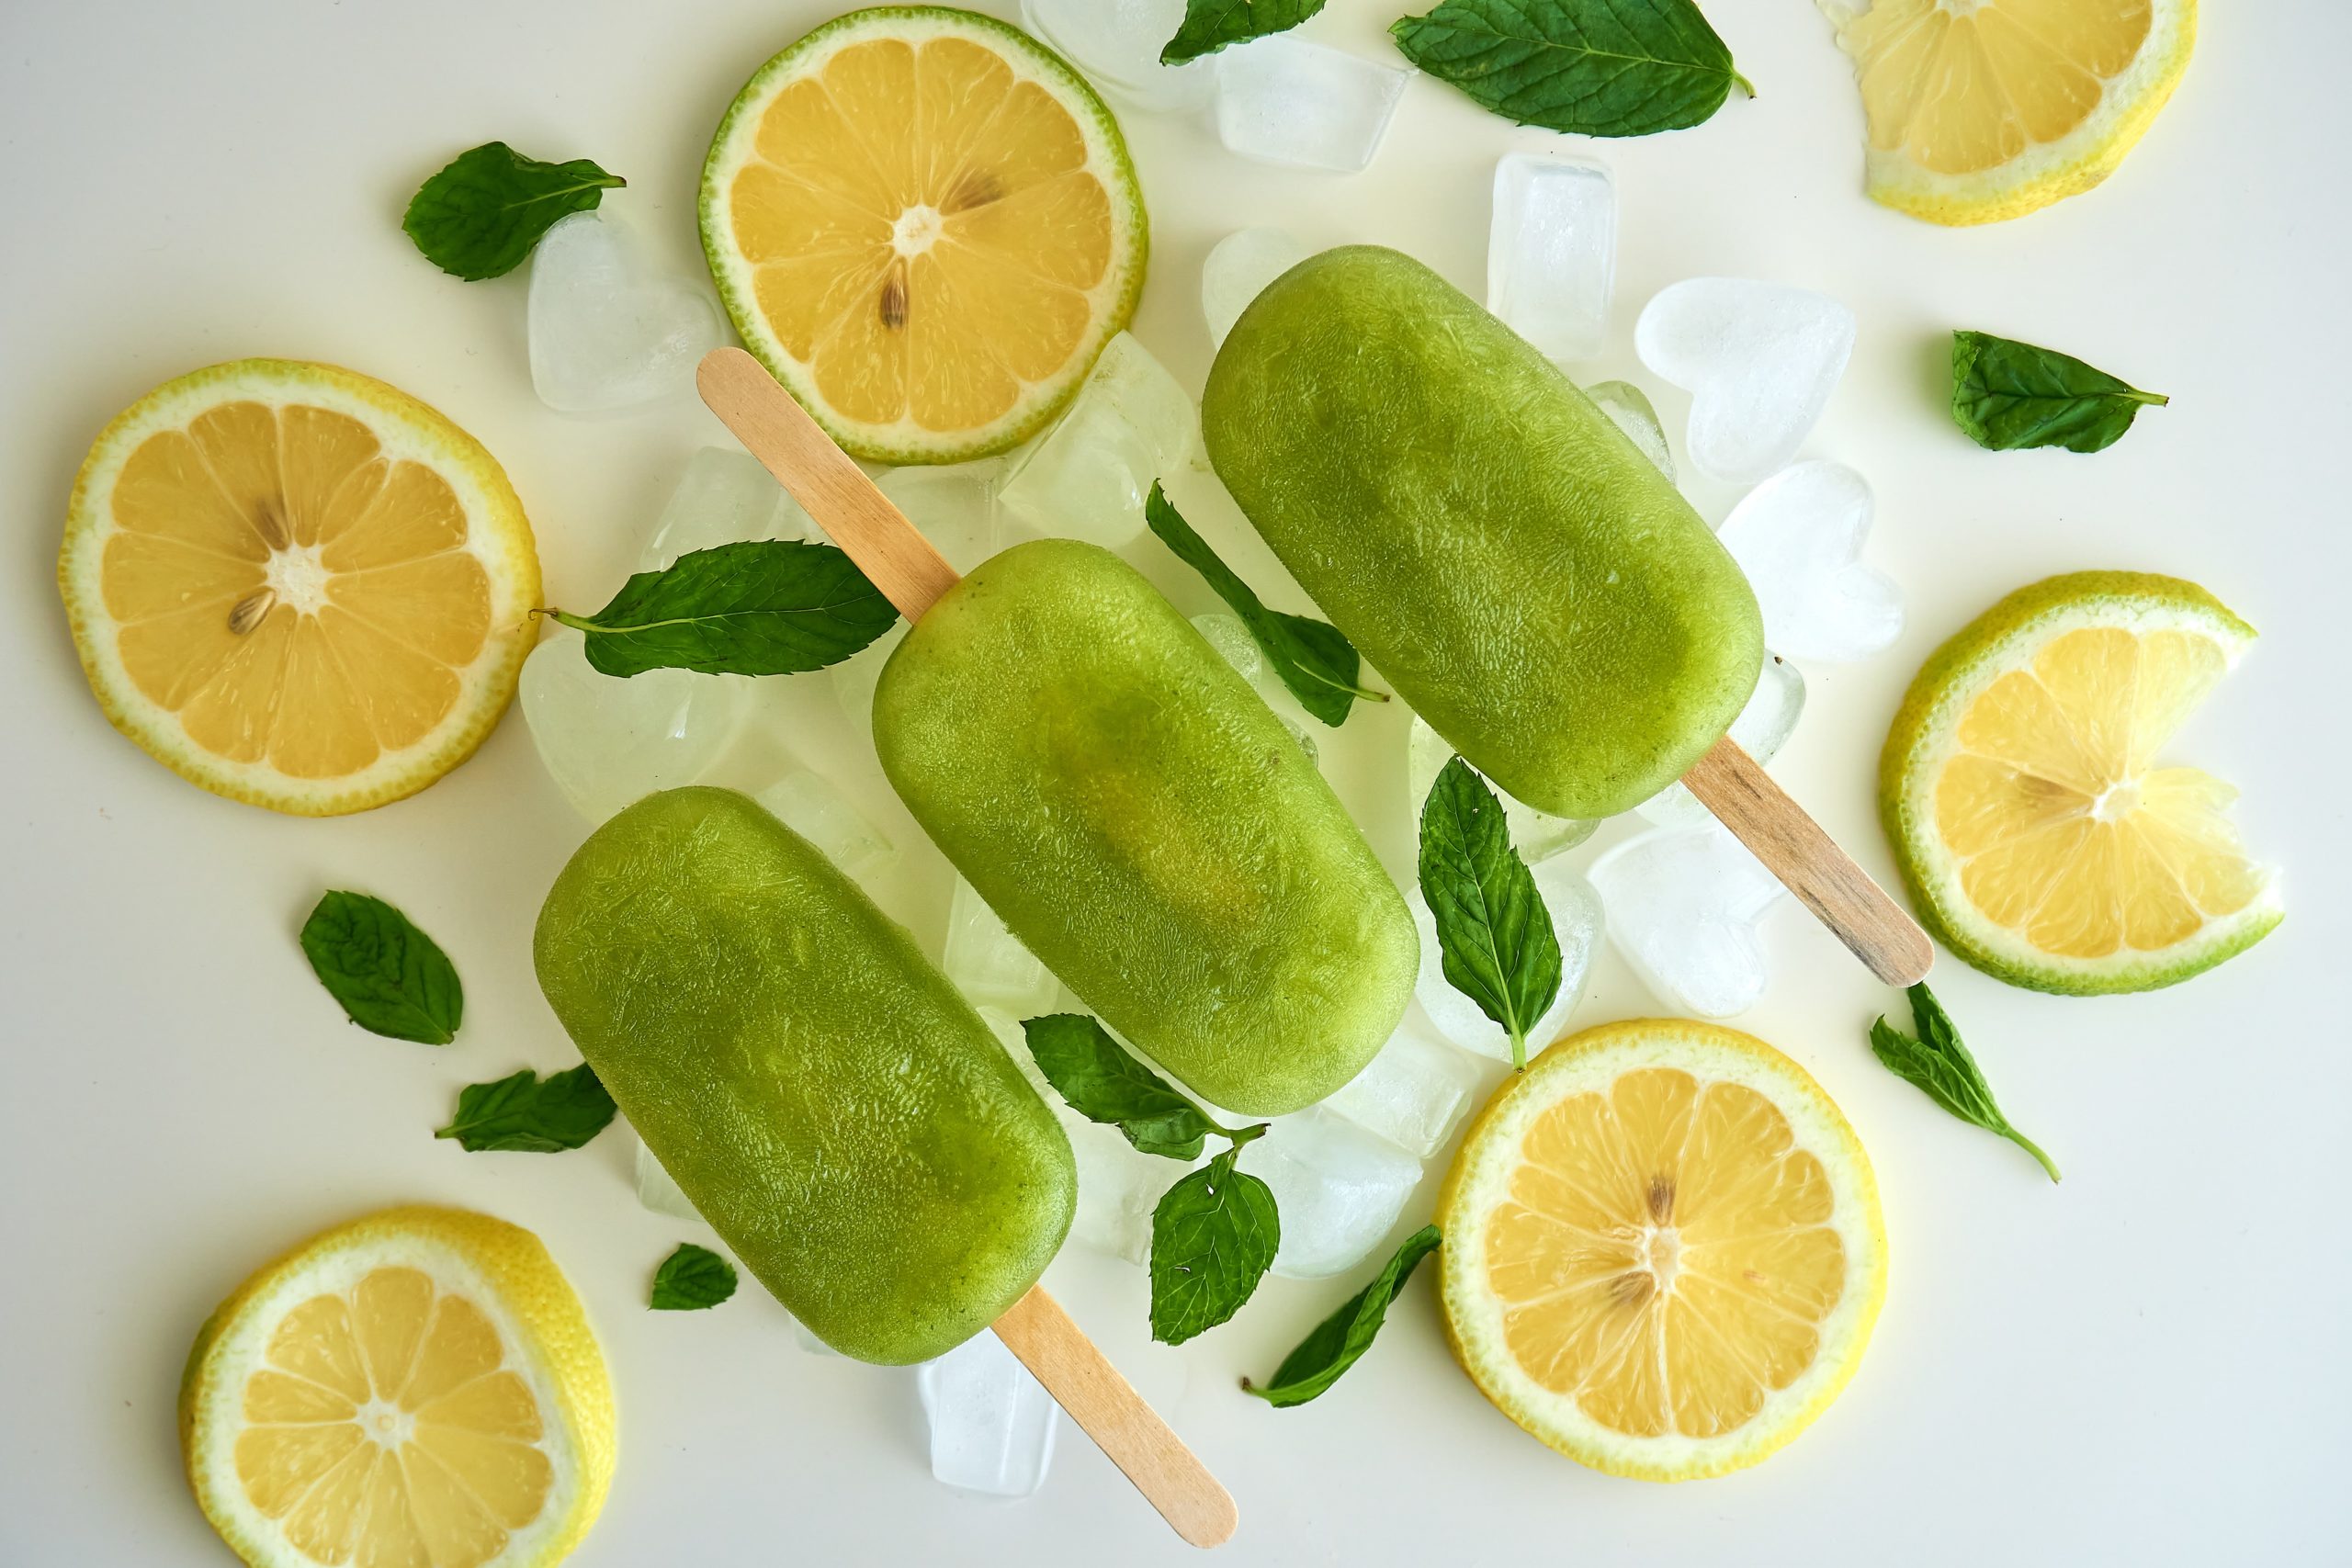 popsicles and limes